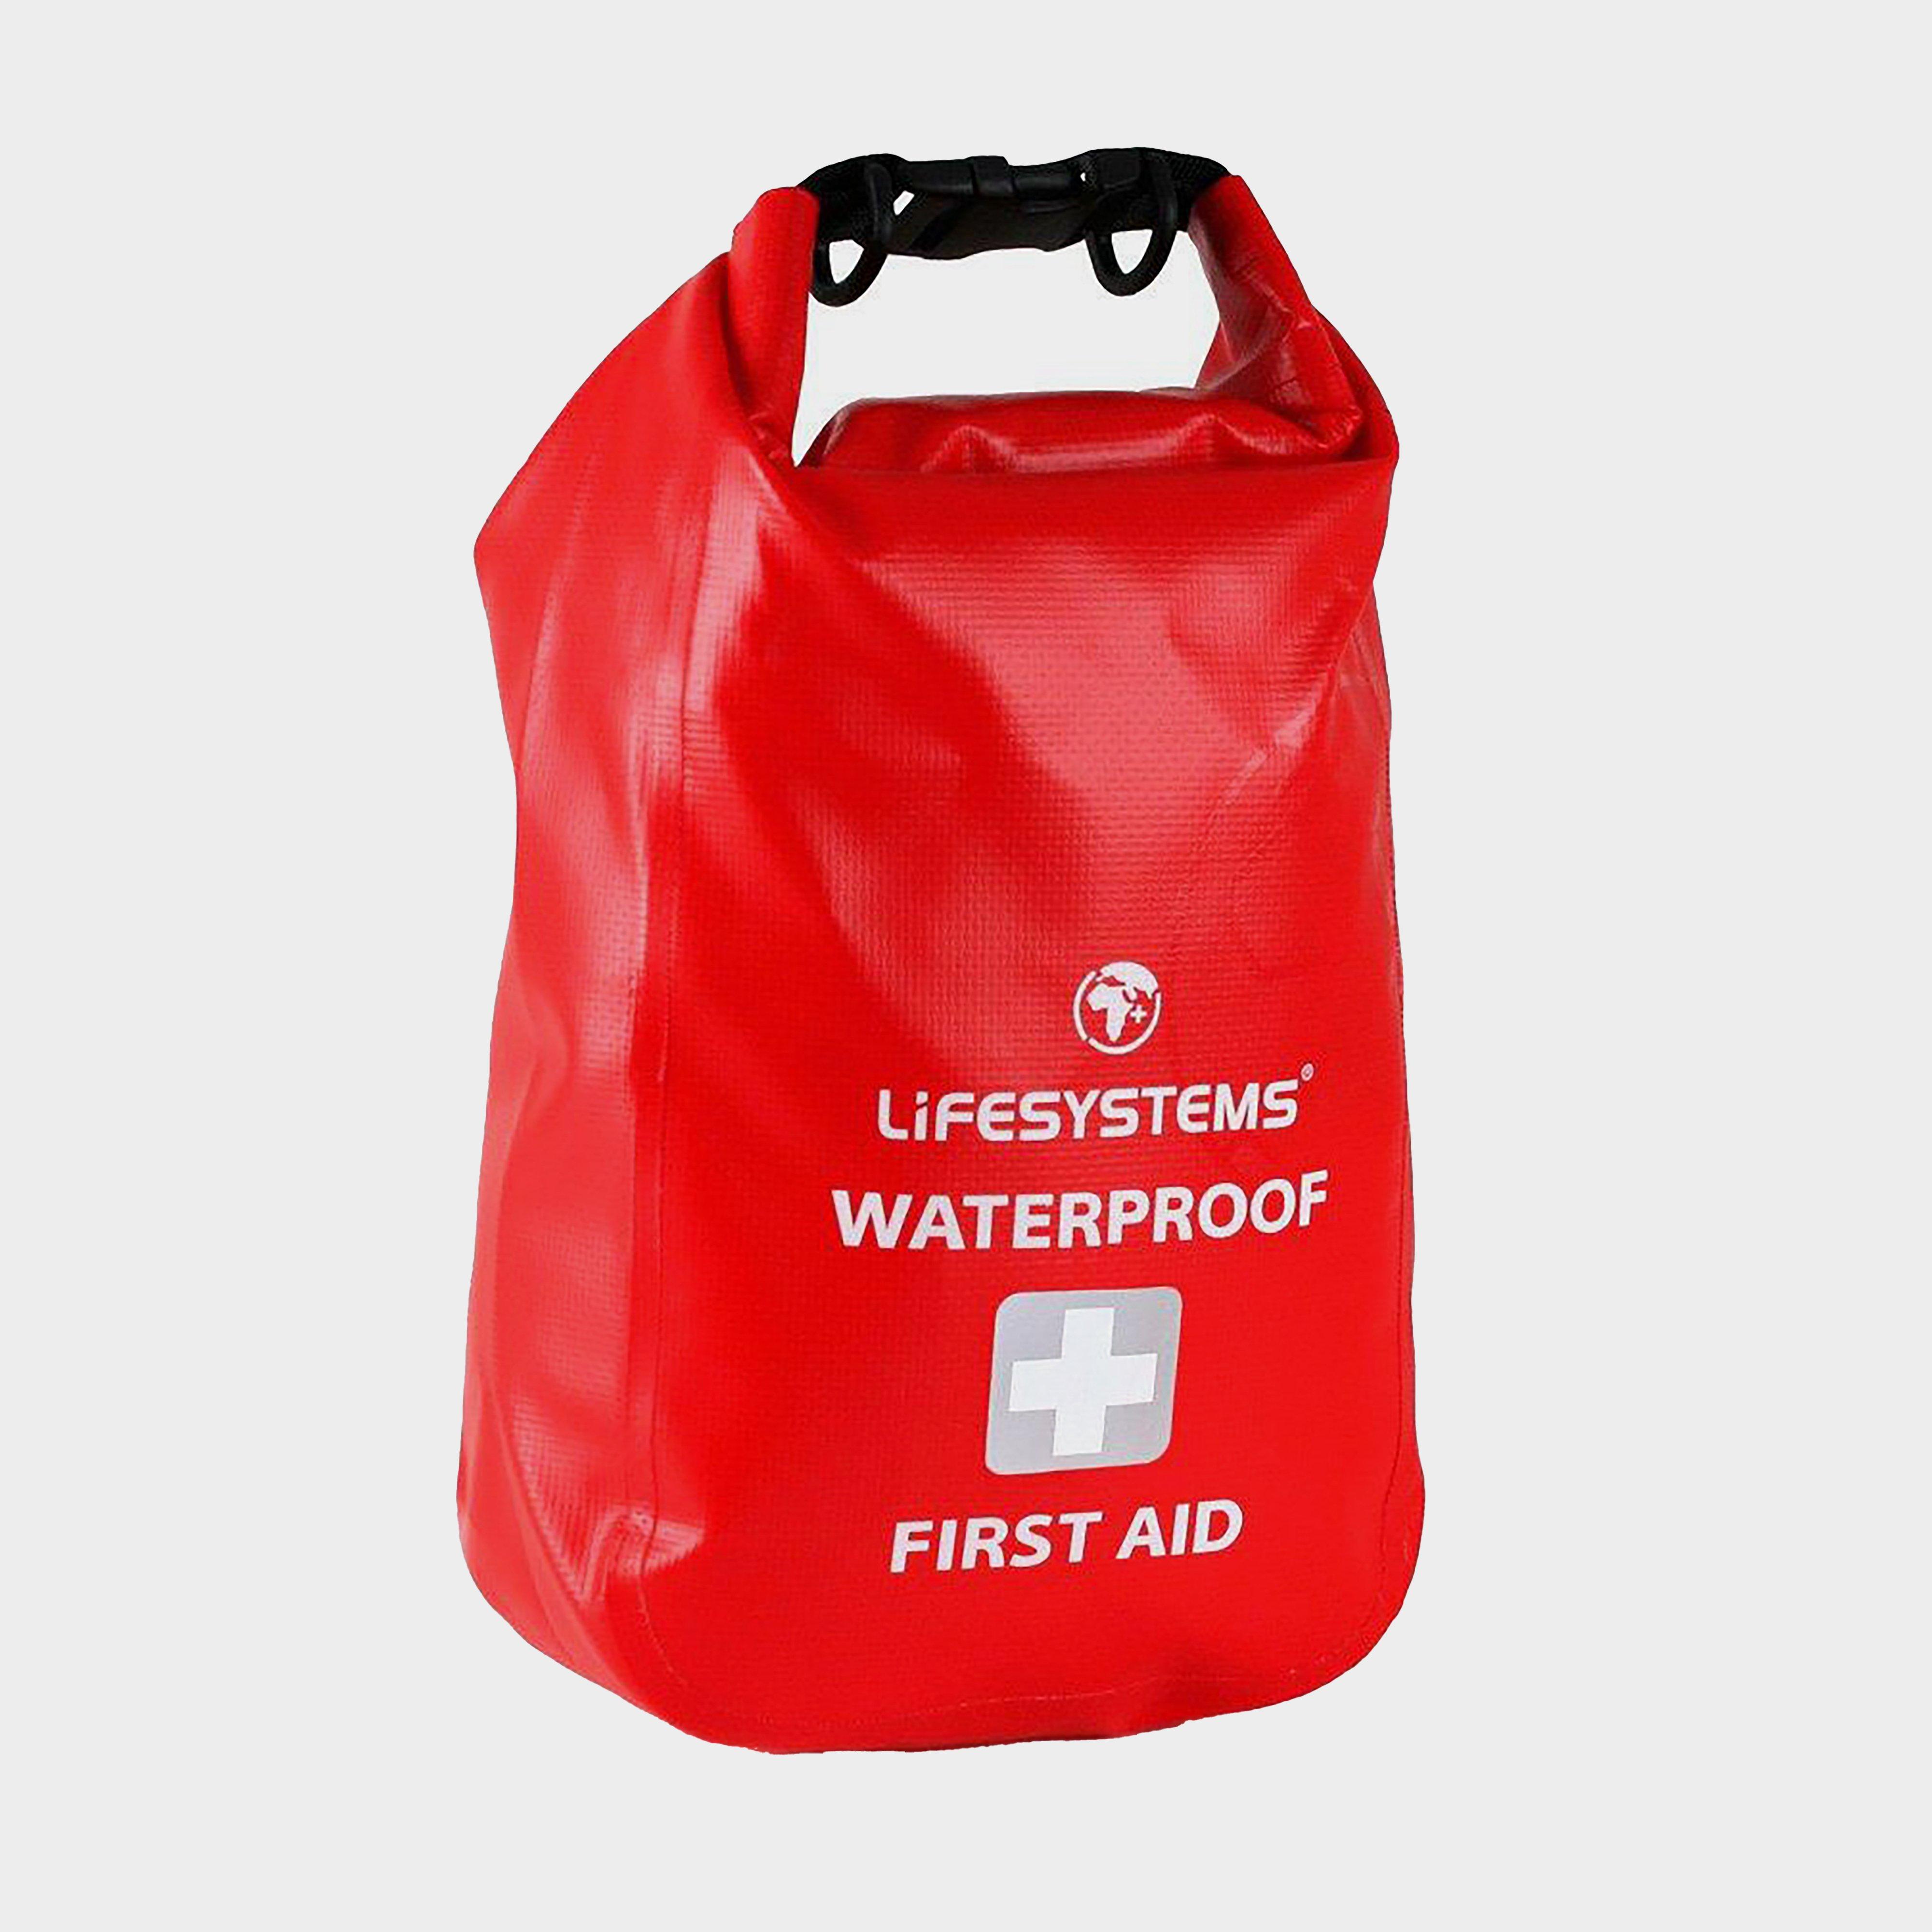  Lifesystems Waterproof First Aid Kit, Red